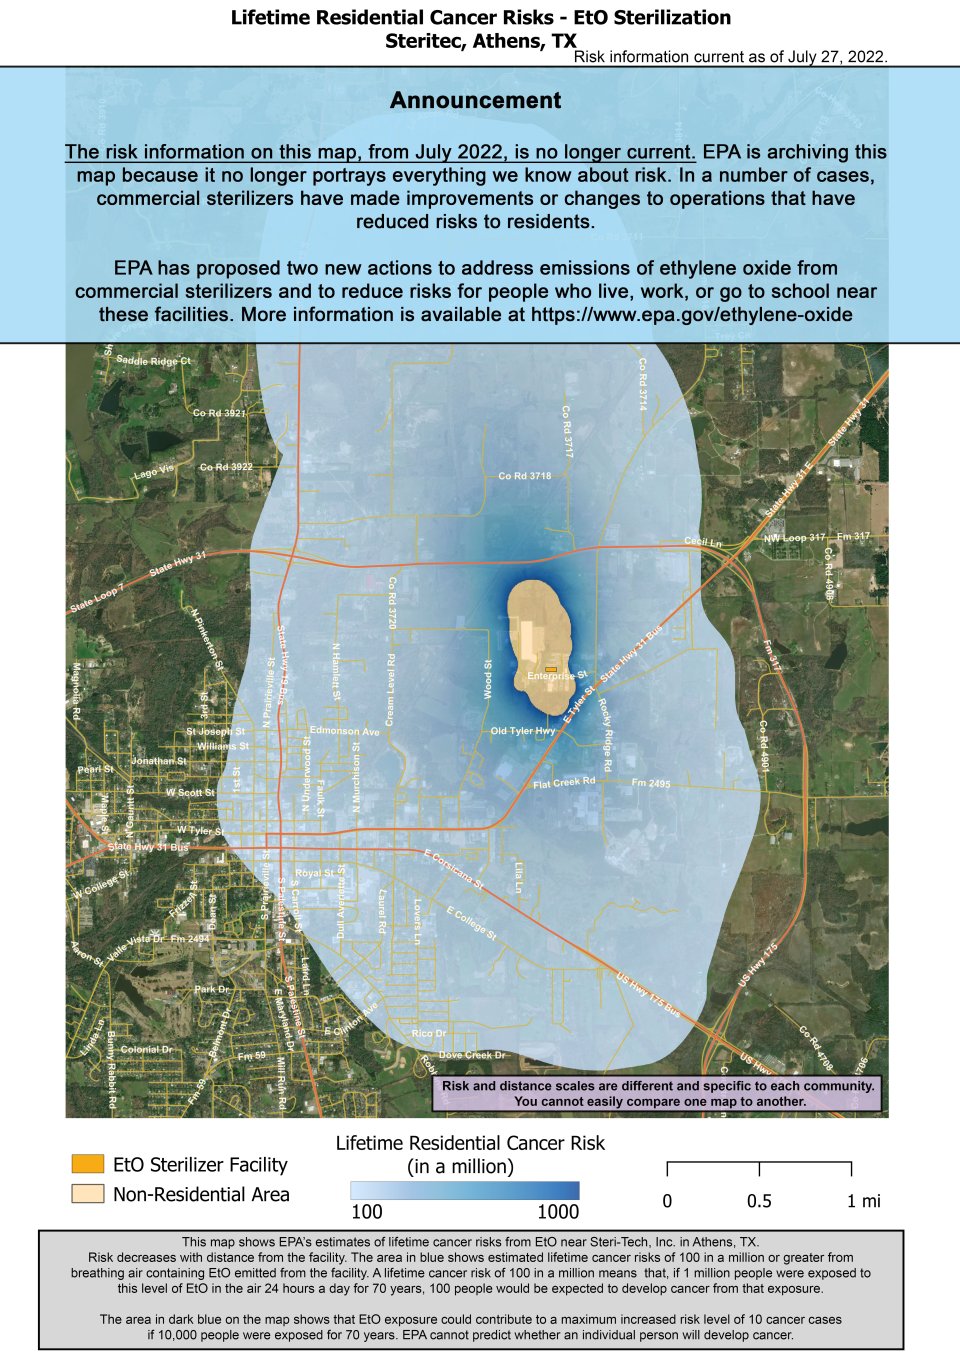 This map shows EPA’s estimate of lifetime cancer risks from breathing ethylene oxide near Steritec, Inc.  located at 1705 Enterprise St Athens, TX 75751. Estimated cancer risk decreases with distance from the facility. Nearest the facility, the estimated lifetime cancer risk is 1,000 in a million. Risk drops to 100 in a million and extends approximately from La Acres Rd (North) to Dove Creek Dr (South), as well as from Stirman St (West) to Co Rd 4901 (East).